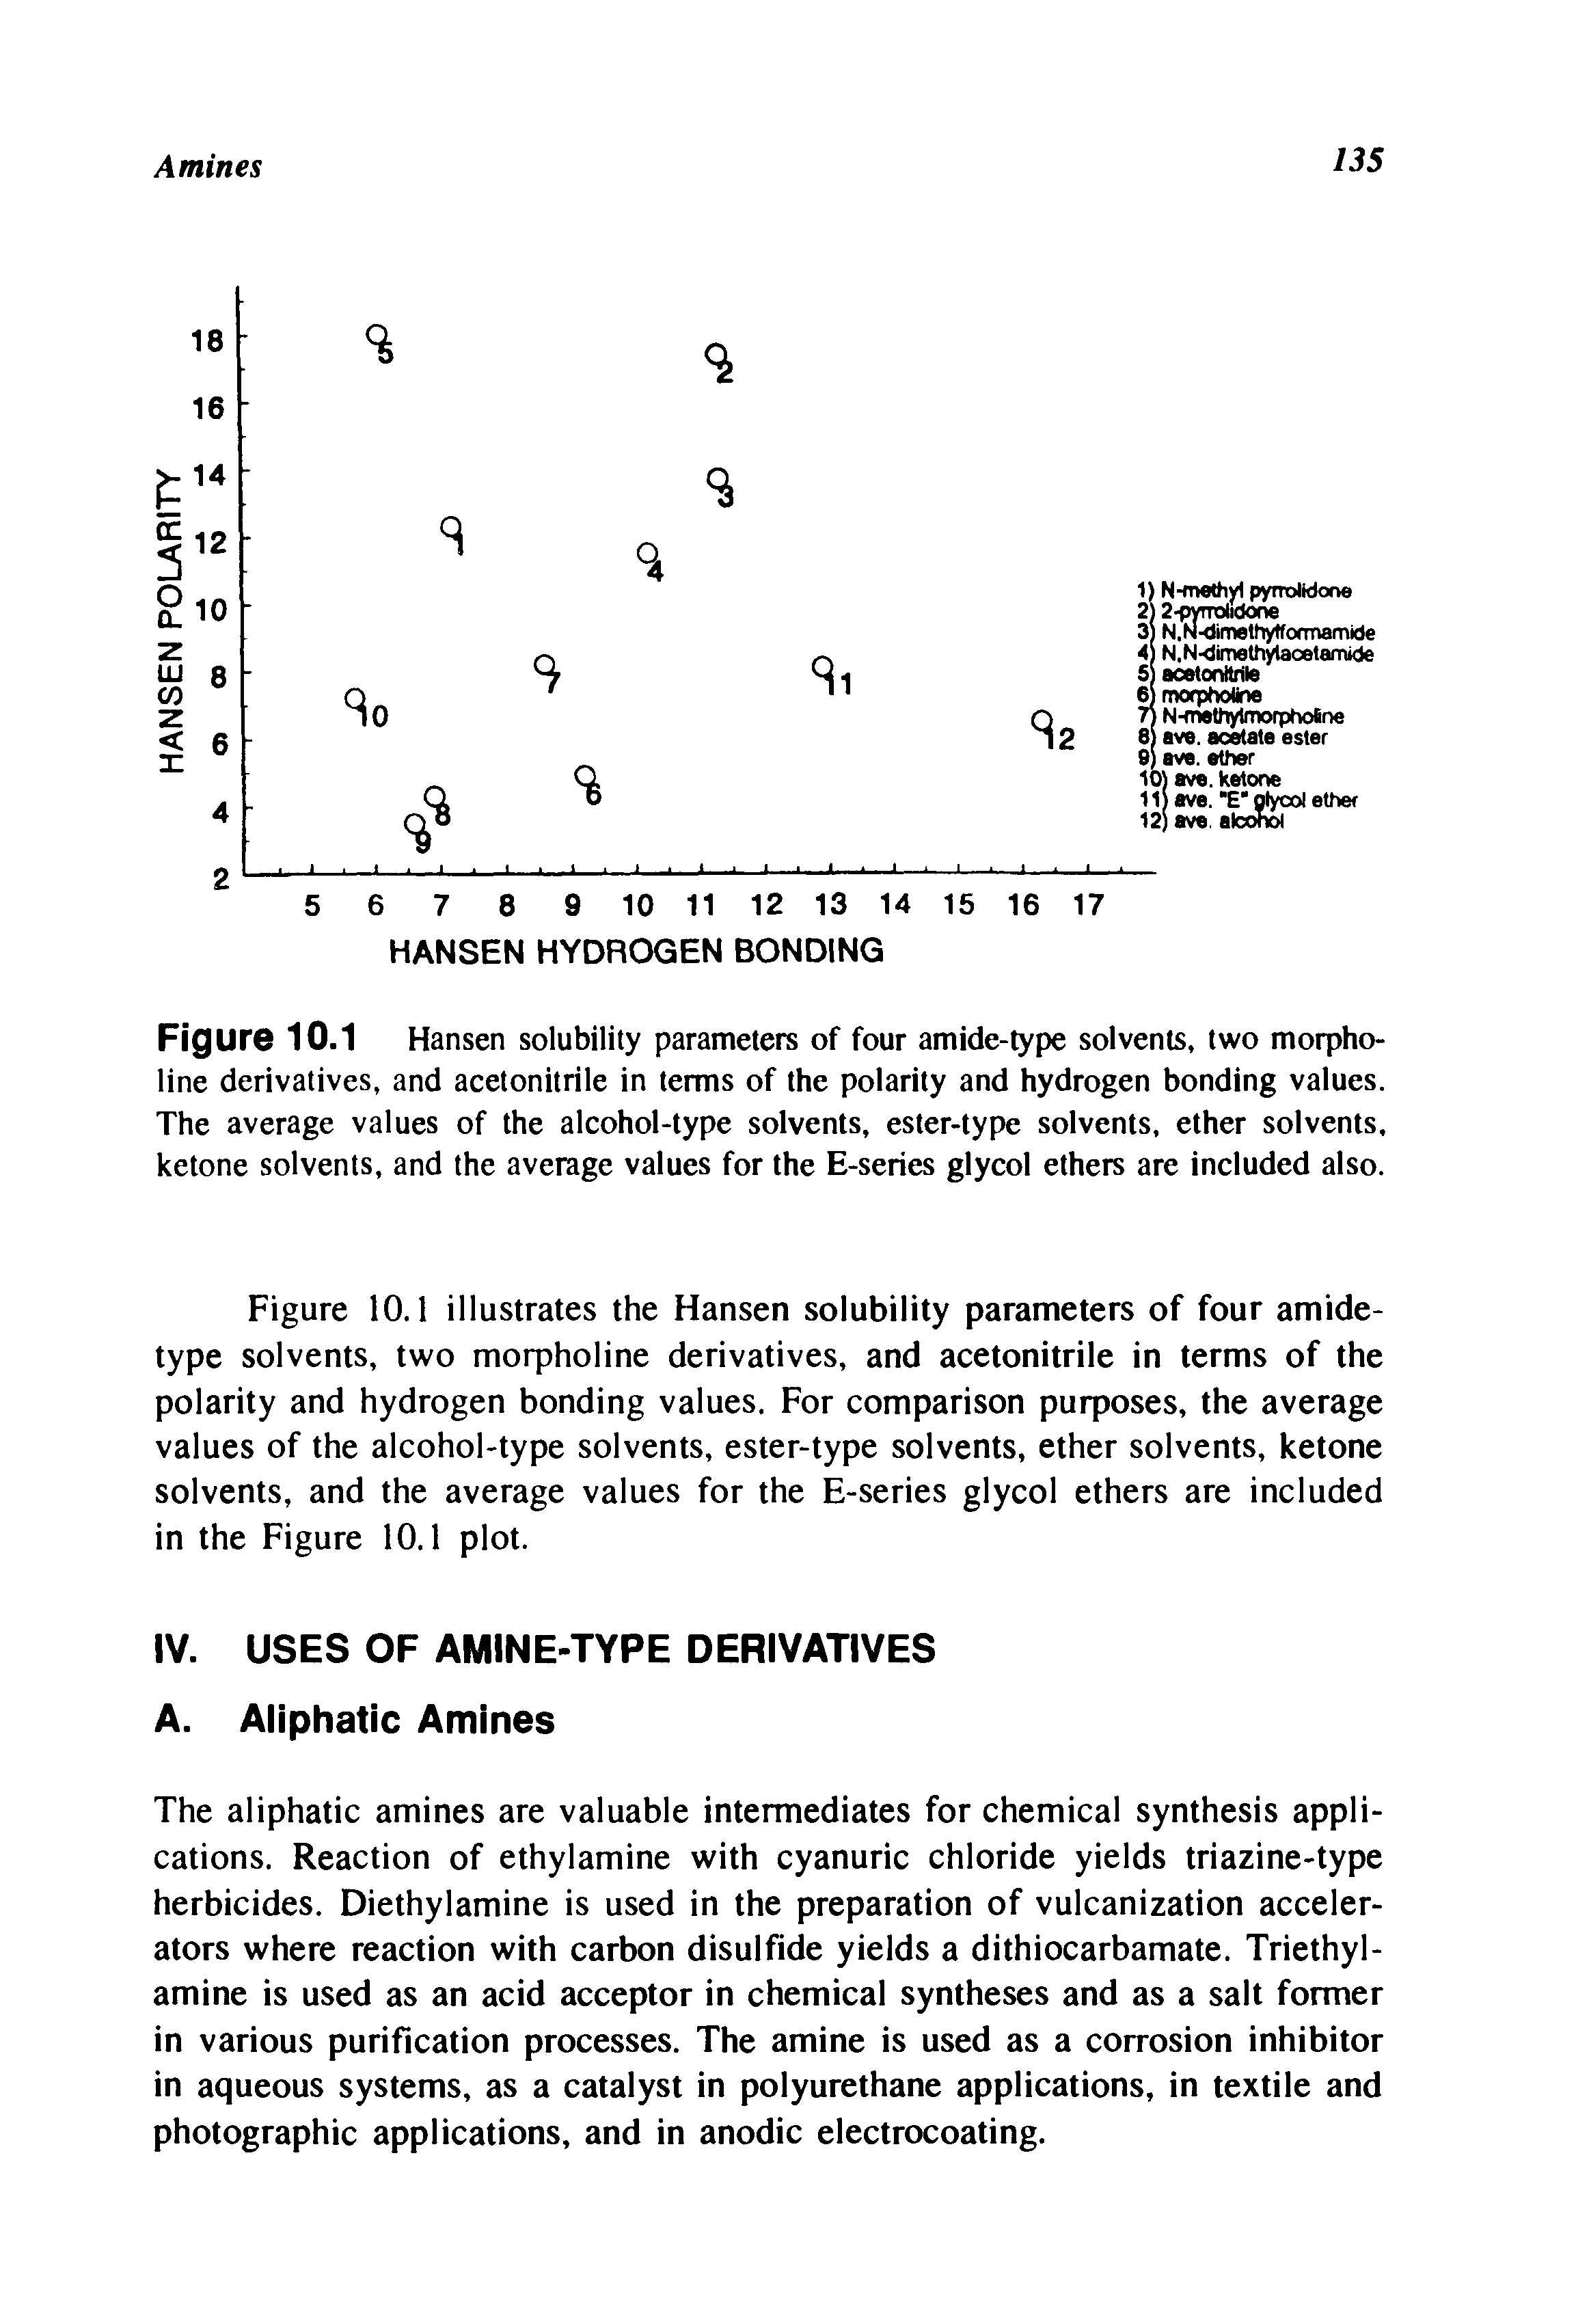 Figure 10.1 Hansen solubility parameters of four amide-type solvents, two morpholine derivatives, and acetonitrile in terms of the polarity and hydrogen bonding values. The average values of the alcohol-type solvents, ester-type solvents, ether solvents, ketone solvents, and the average values for the E-series glycol ethers are included also.